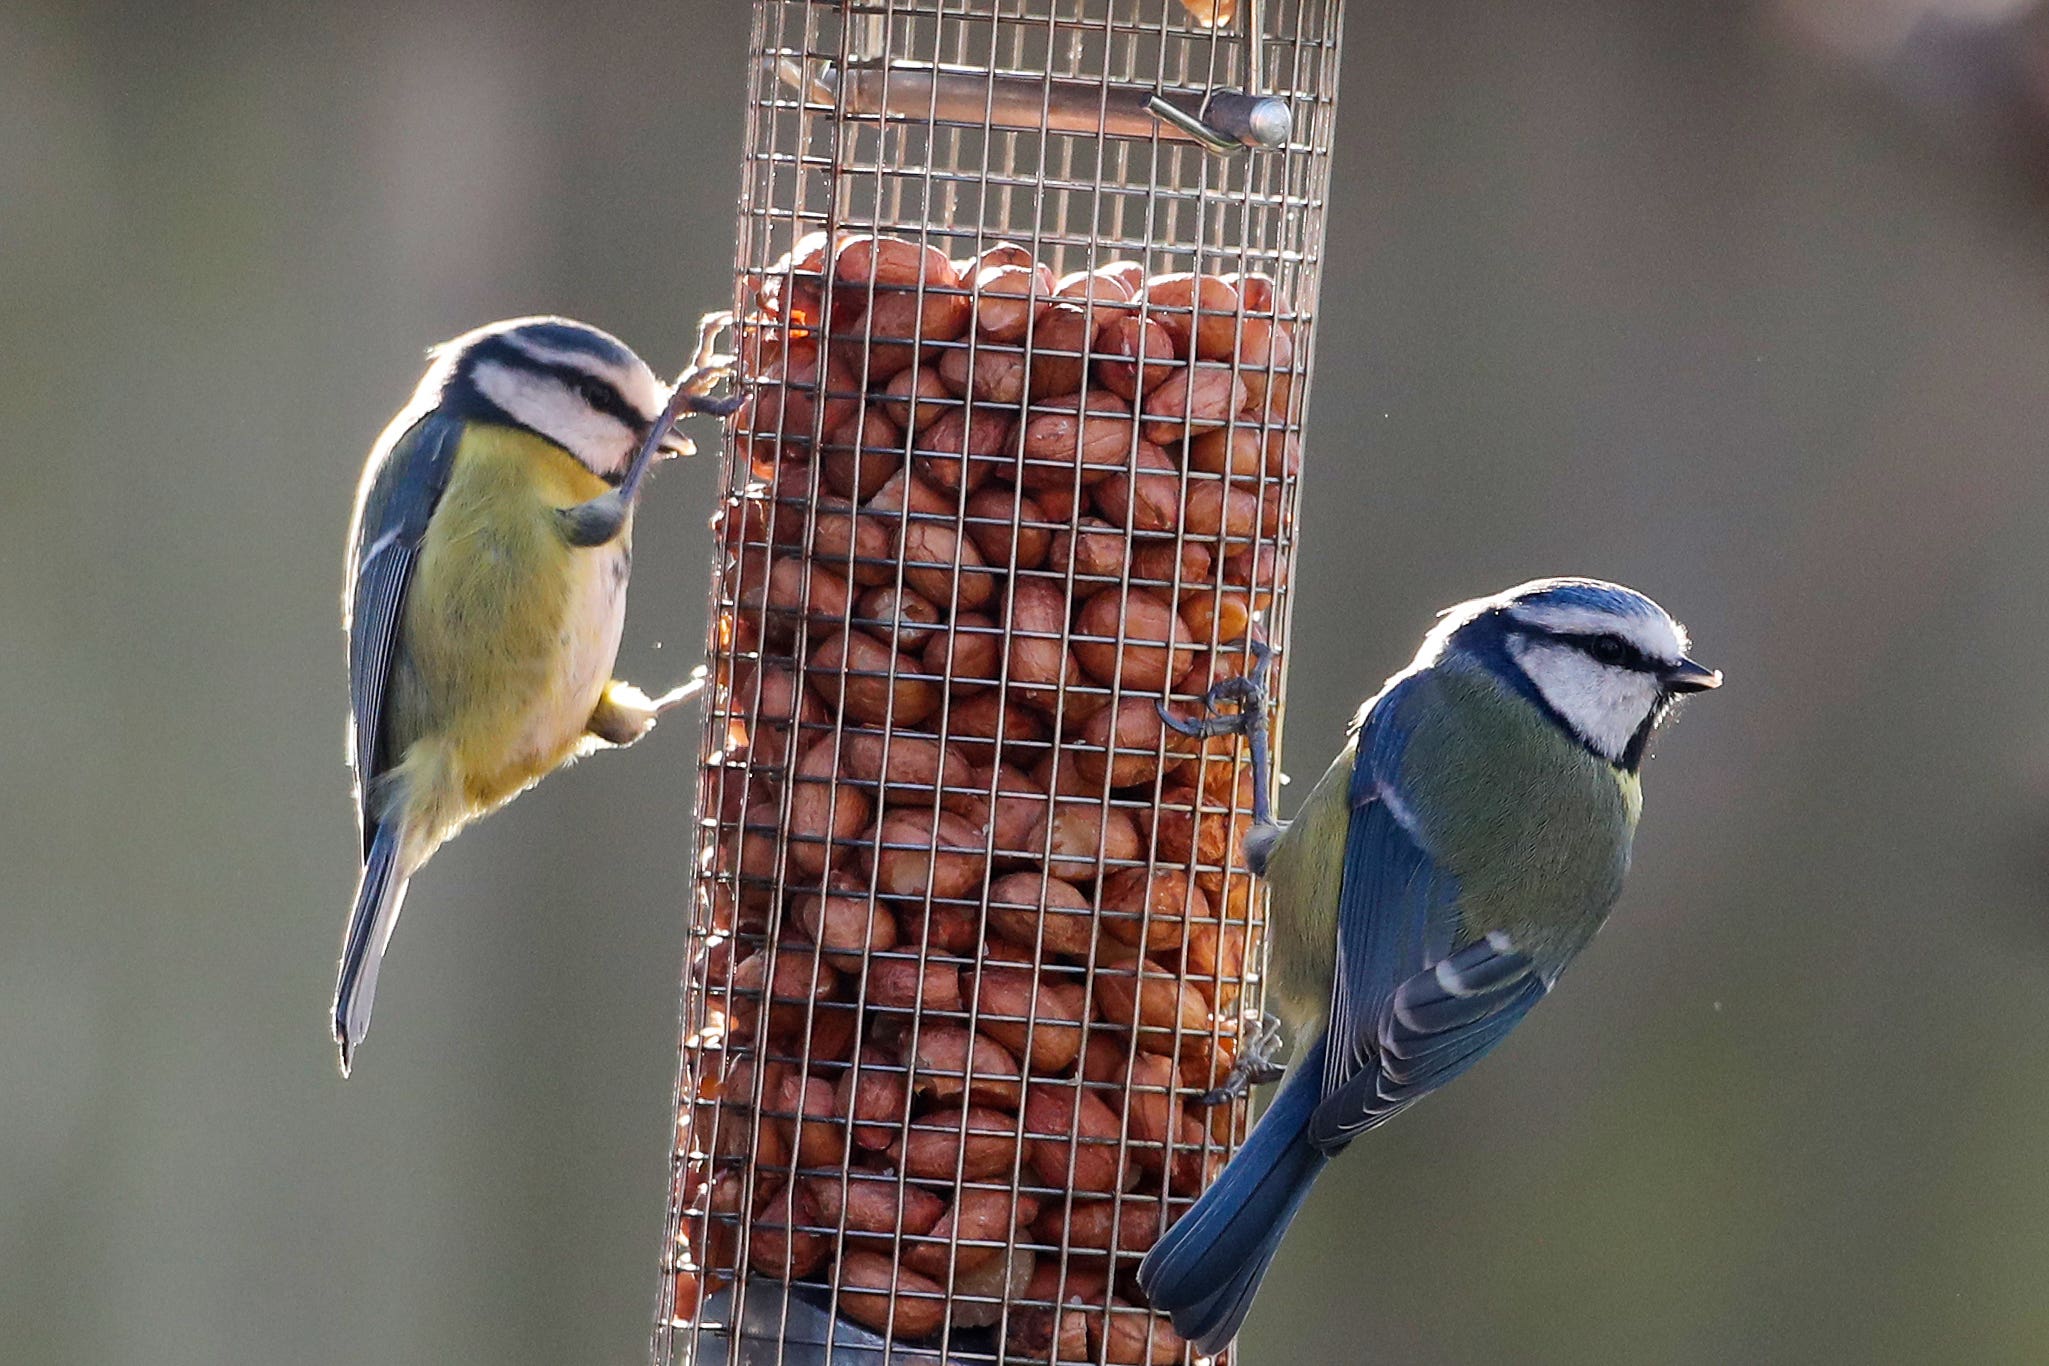 Bird diversity can affect people’s mood, scientists say (David Davies/PA)